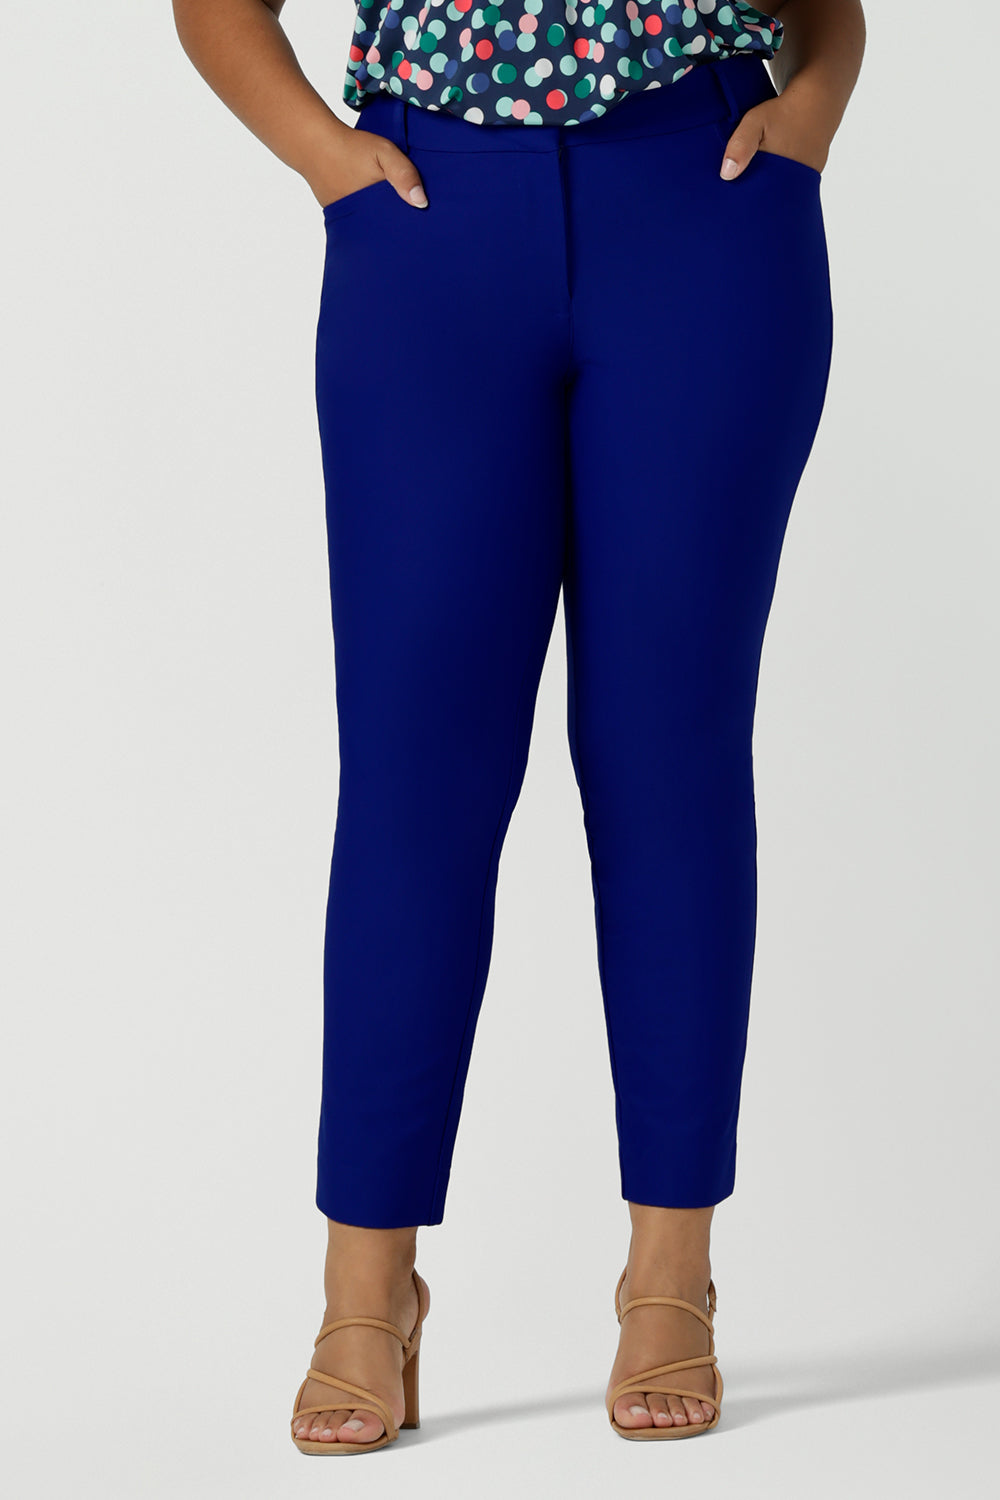 Cobalt blue tailored work pants in stretch ponte fabric are shown on size 18 woman. Great trousers for plus size women, these tailored work pants are made in Australia by women's clothing brand, Leina & Fleur and are available to shop online in sizes 8 to 24.